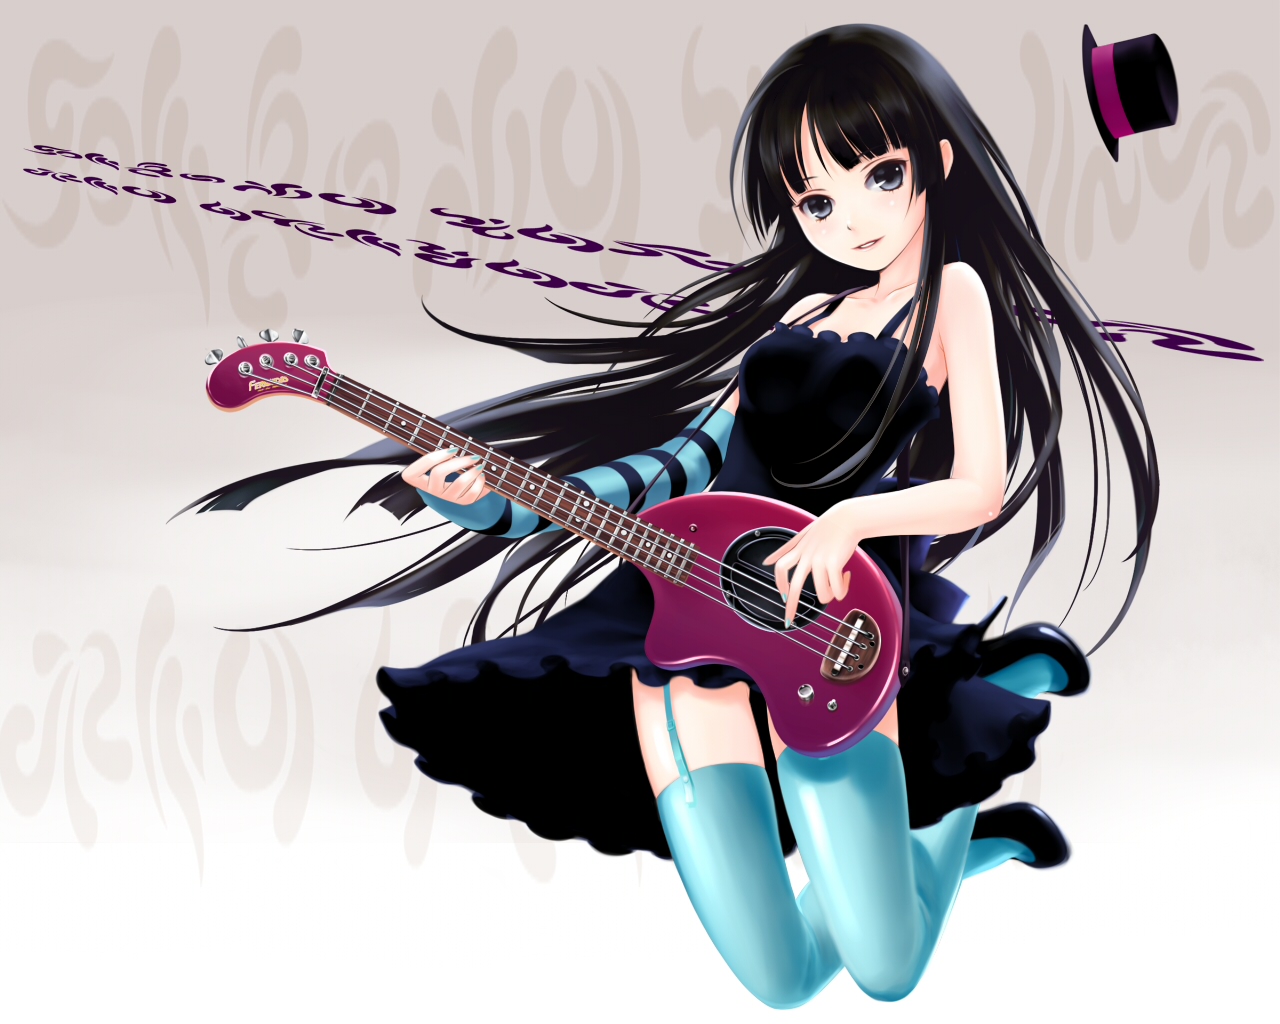 Anime Girl 128 Facebook Covers - Cartoon Girl With Guitar , HD Wallpaper & Backgrounds